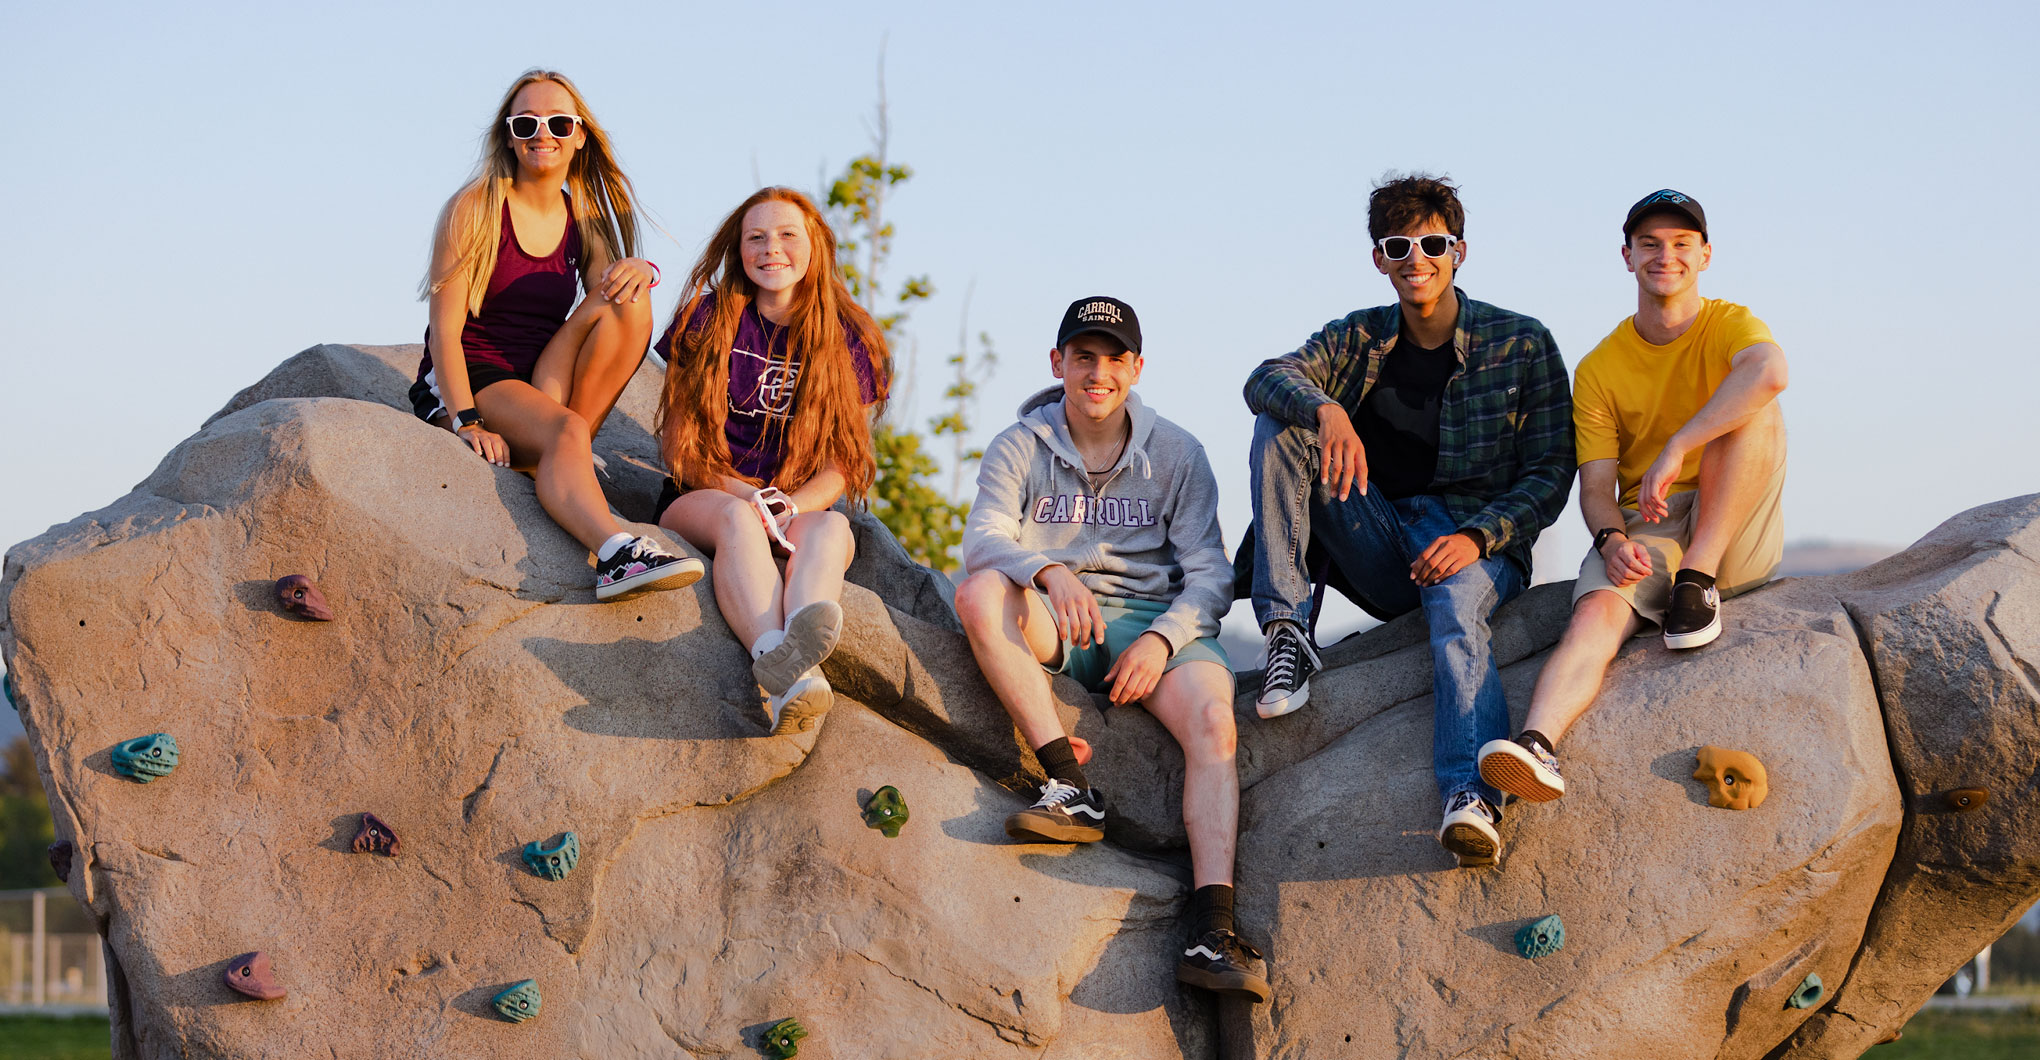 Five Students on Climbing Rock